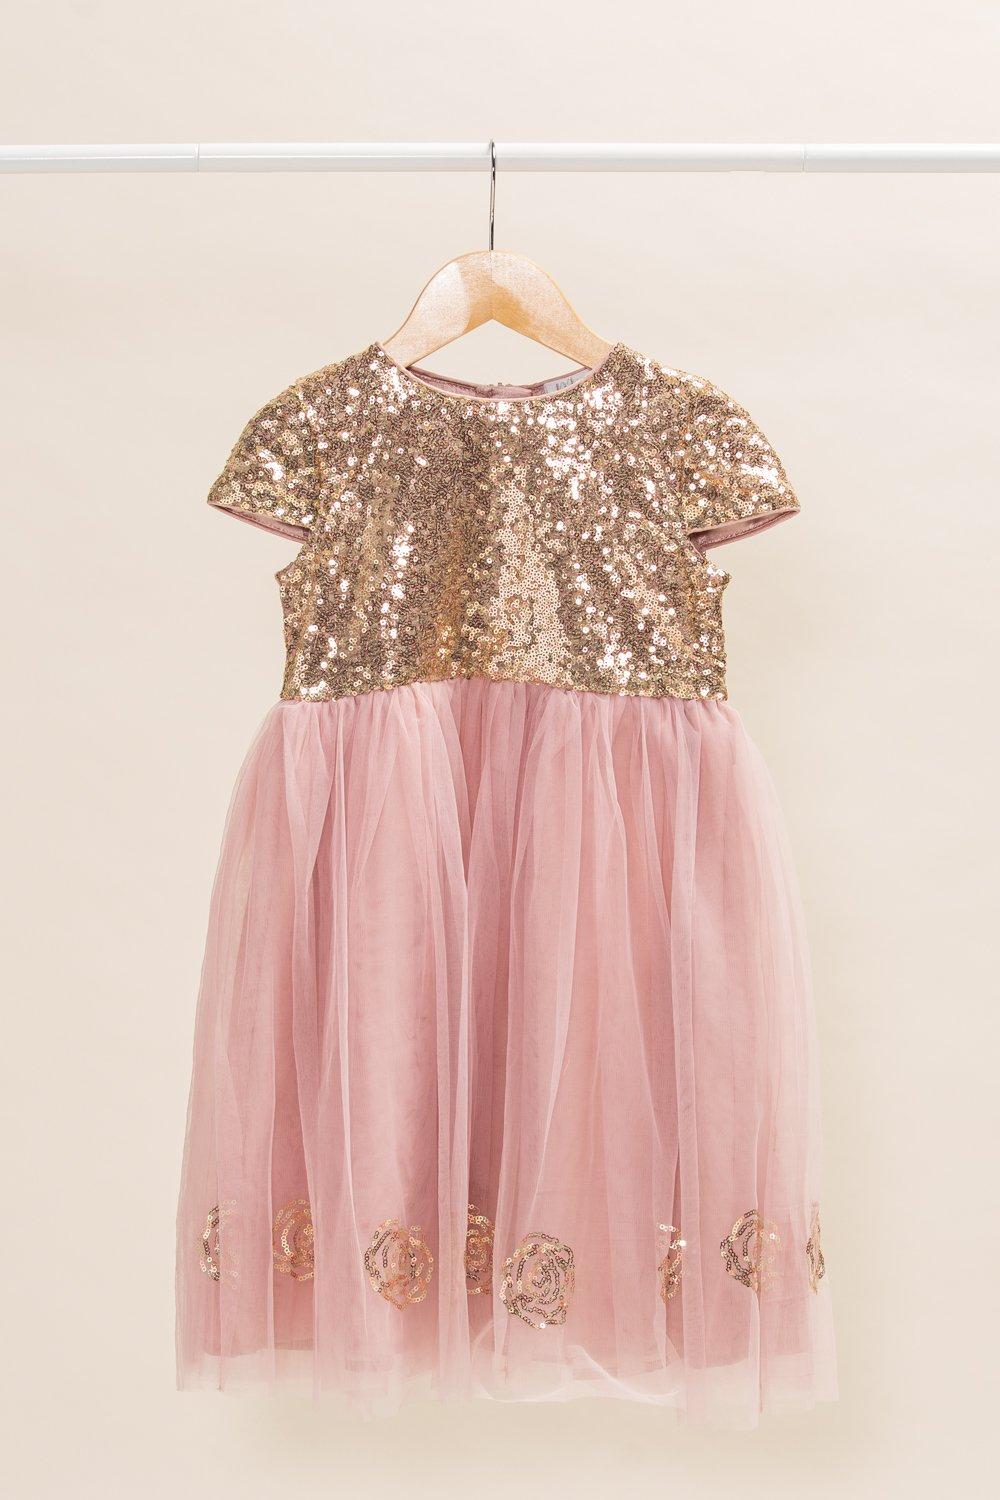 Sequin Top Waterfall Tulle Dress